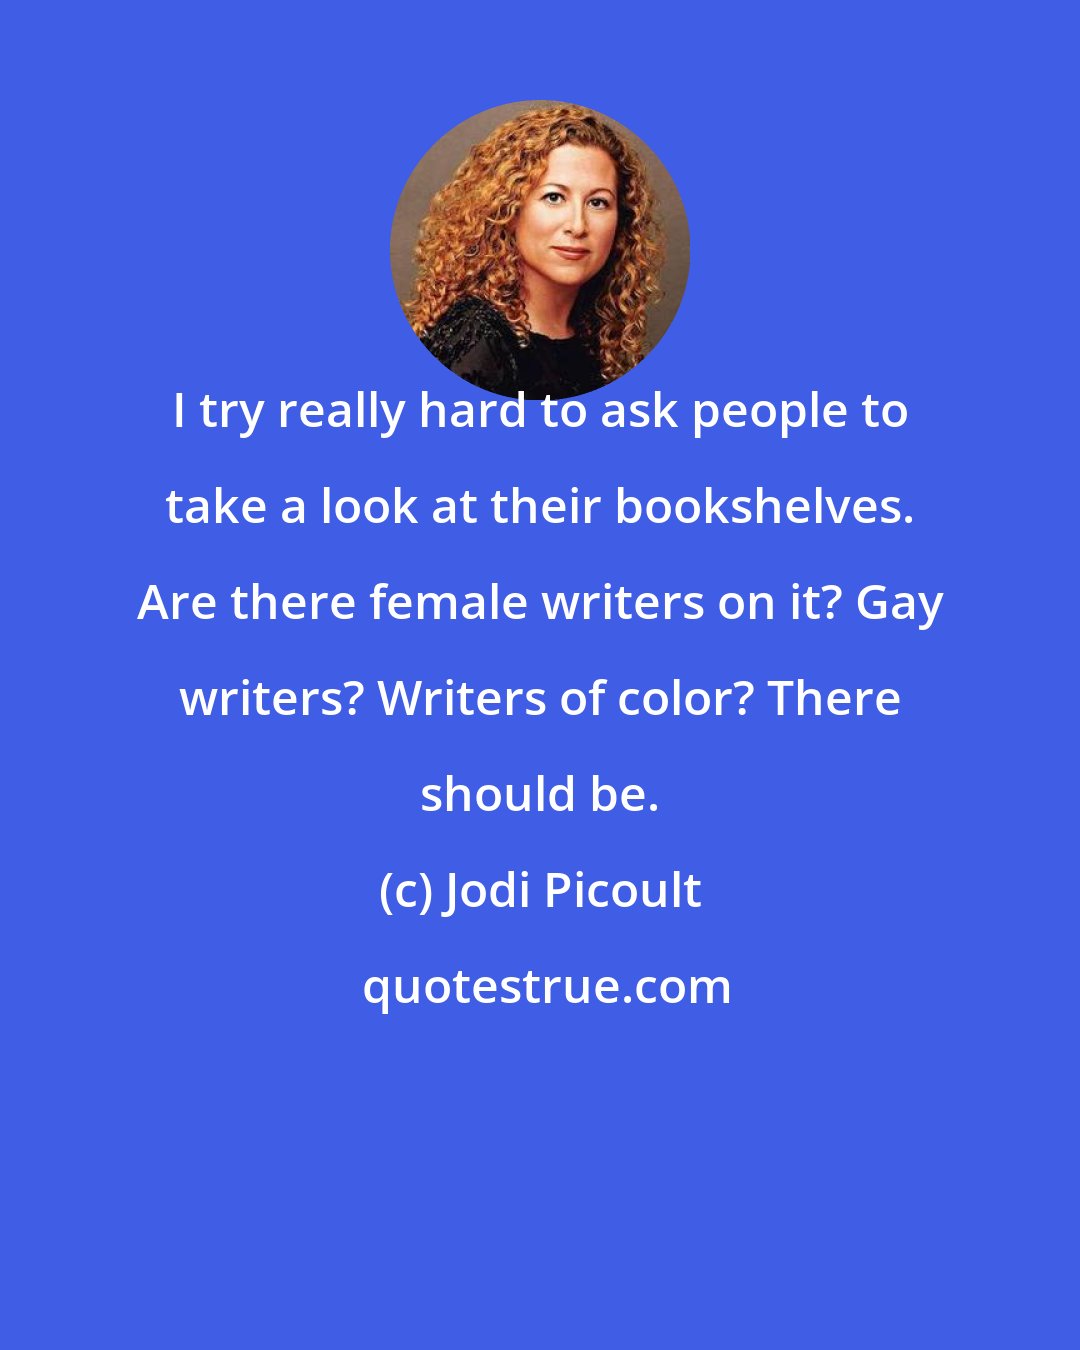 Jodi Picoult: I try really hard to ask people to take a look at their bookshelves. Are there female writers on it? Gay writers? Writers of color? There should be.